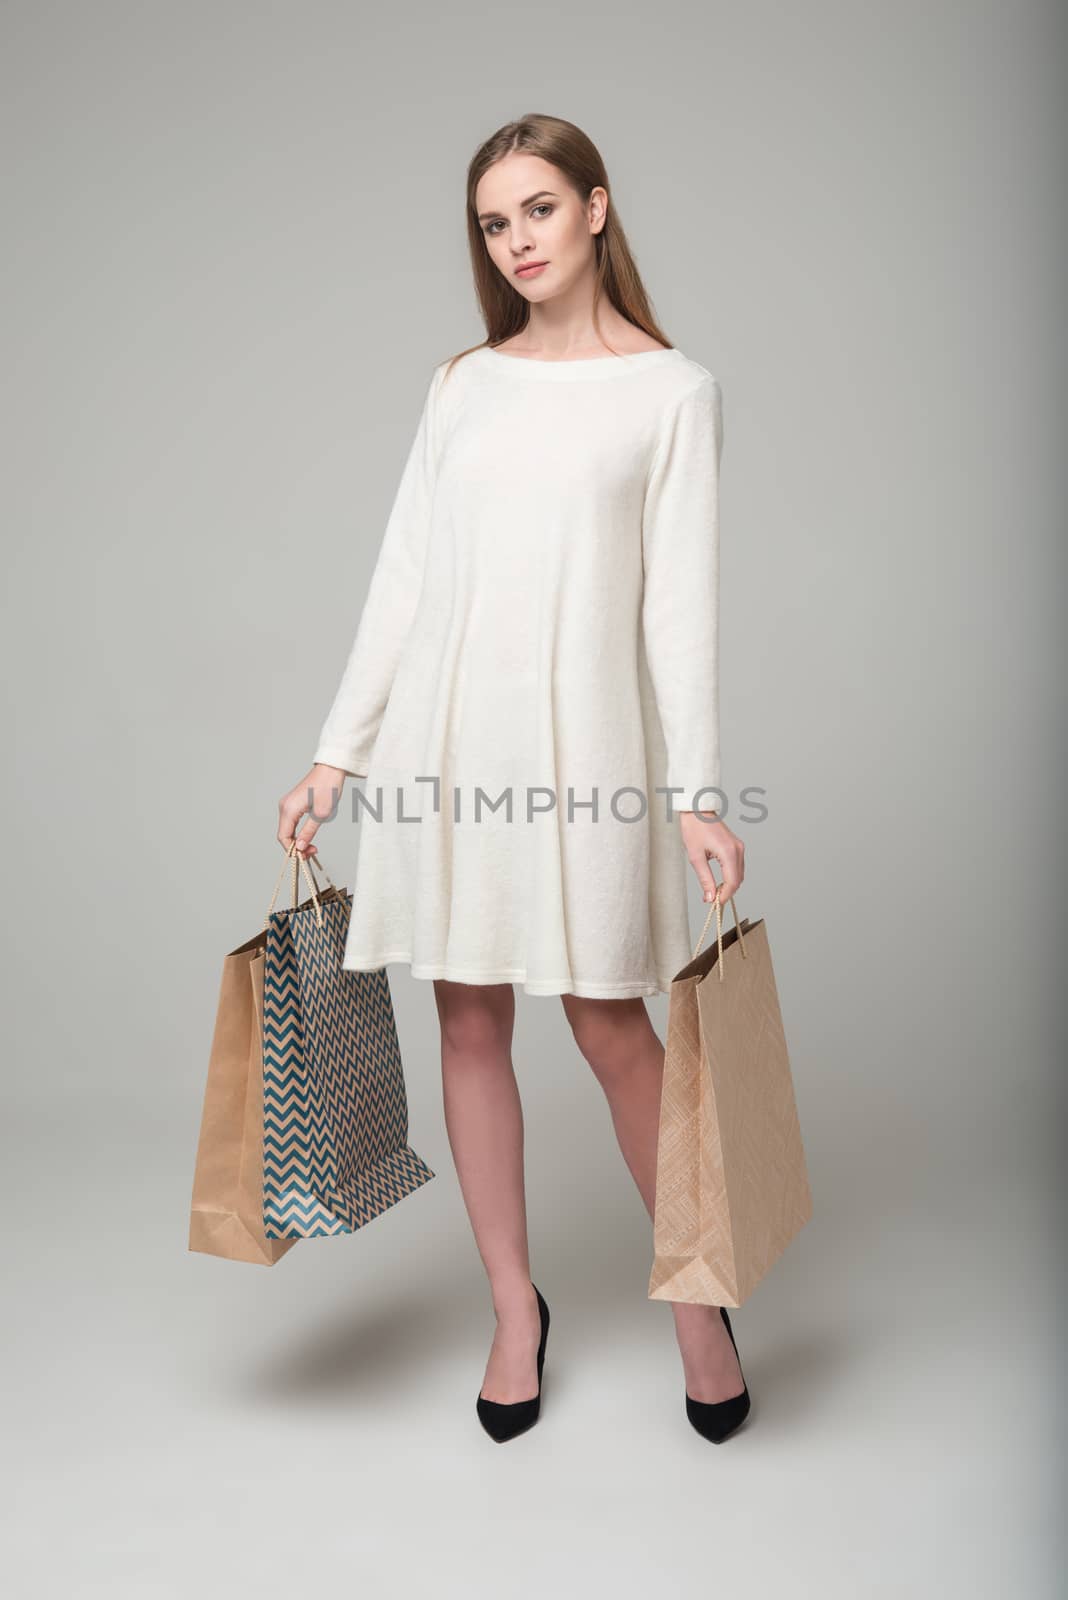 Blond girl in white short dress with shopping paper bags by VeraVerano